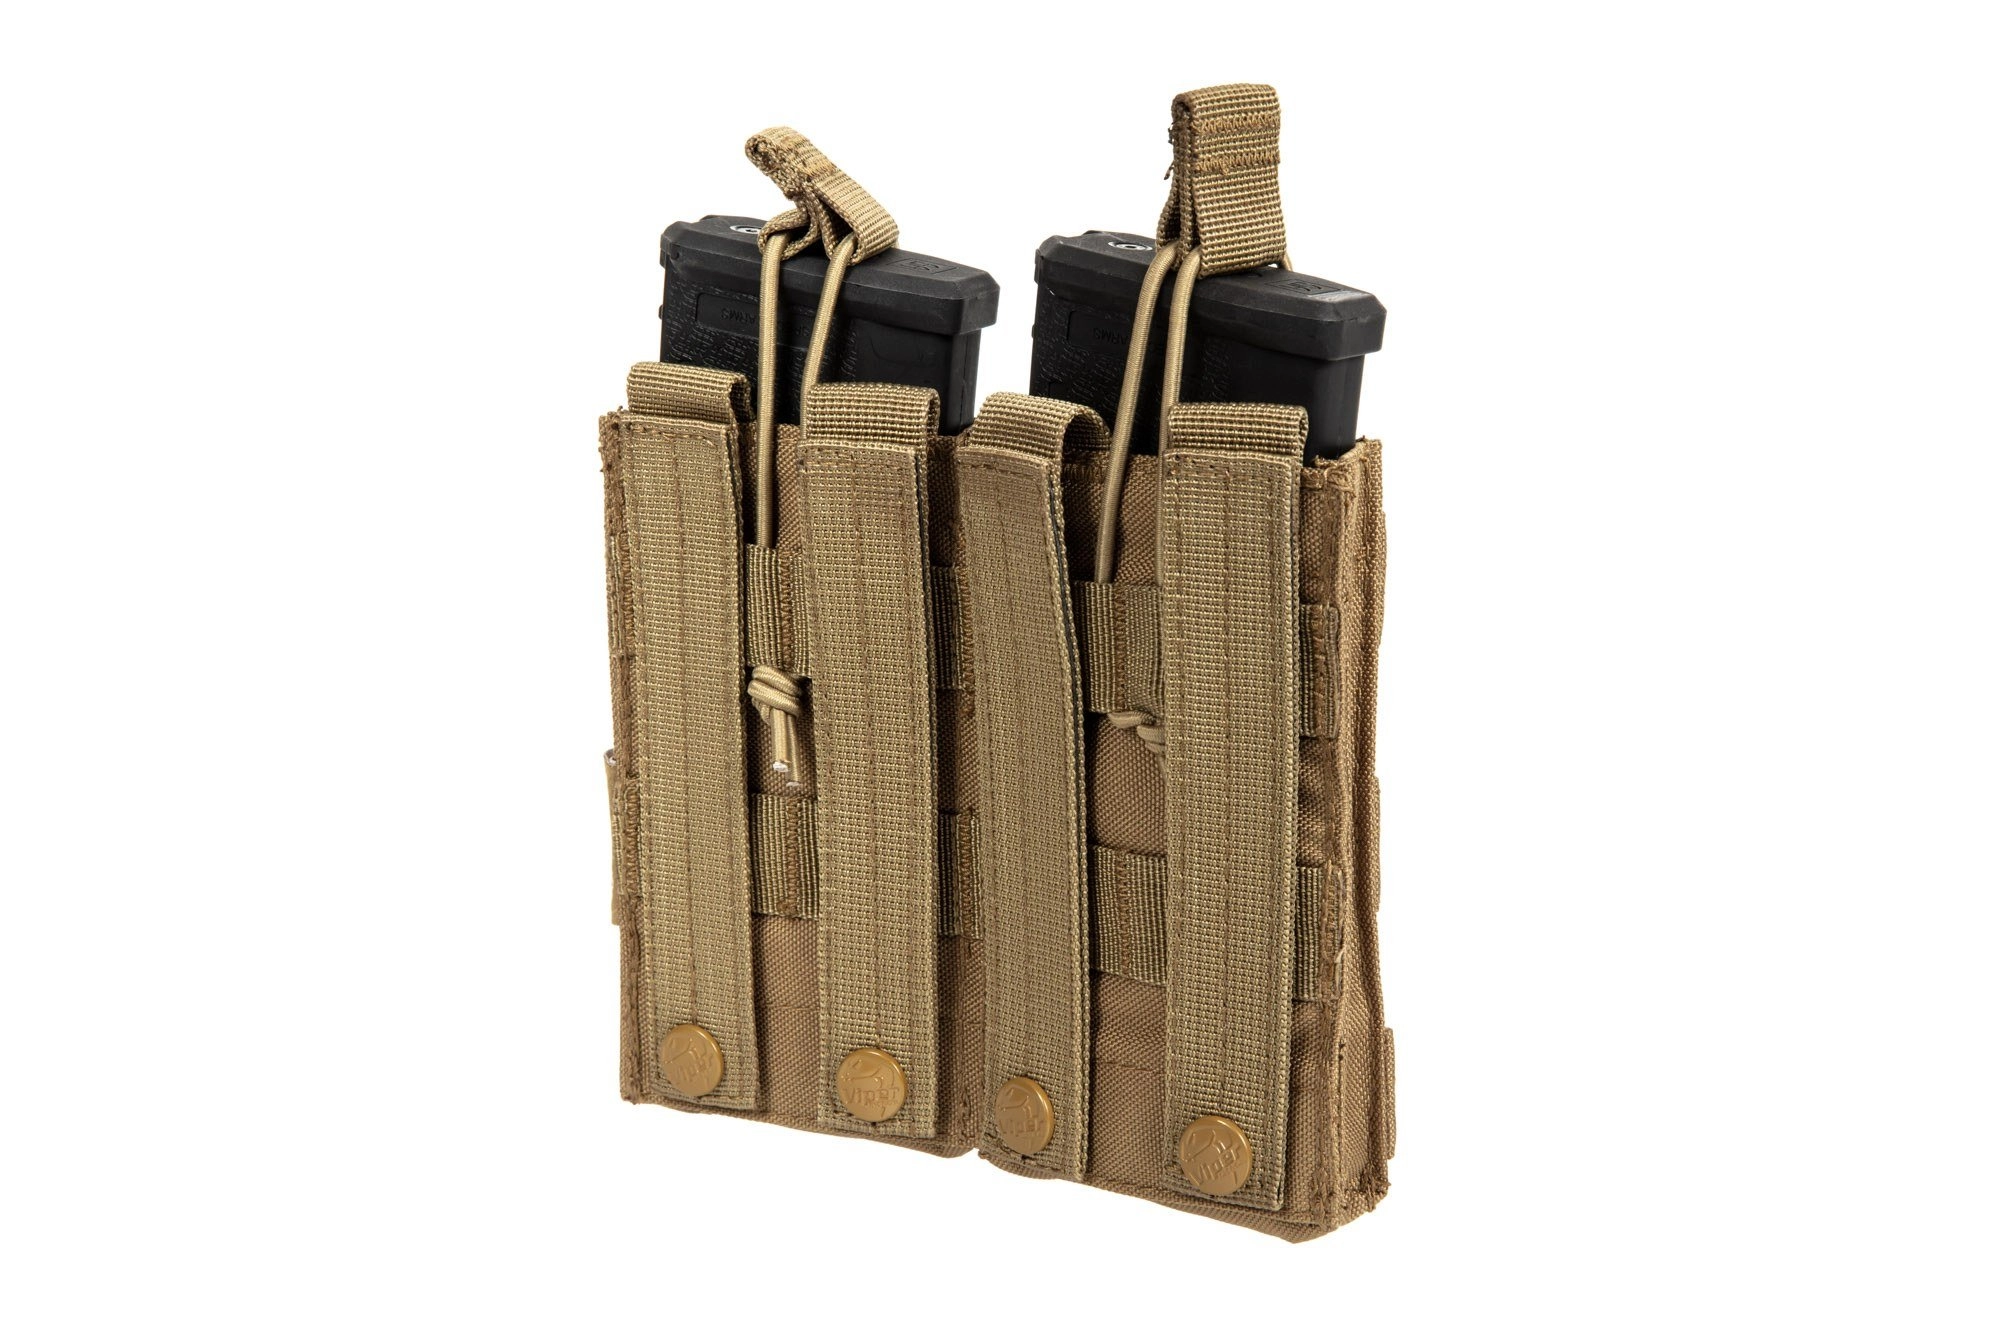 Quick Release Pouch for 2 M4/M16 type magazine - Coyote